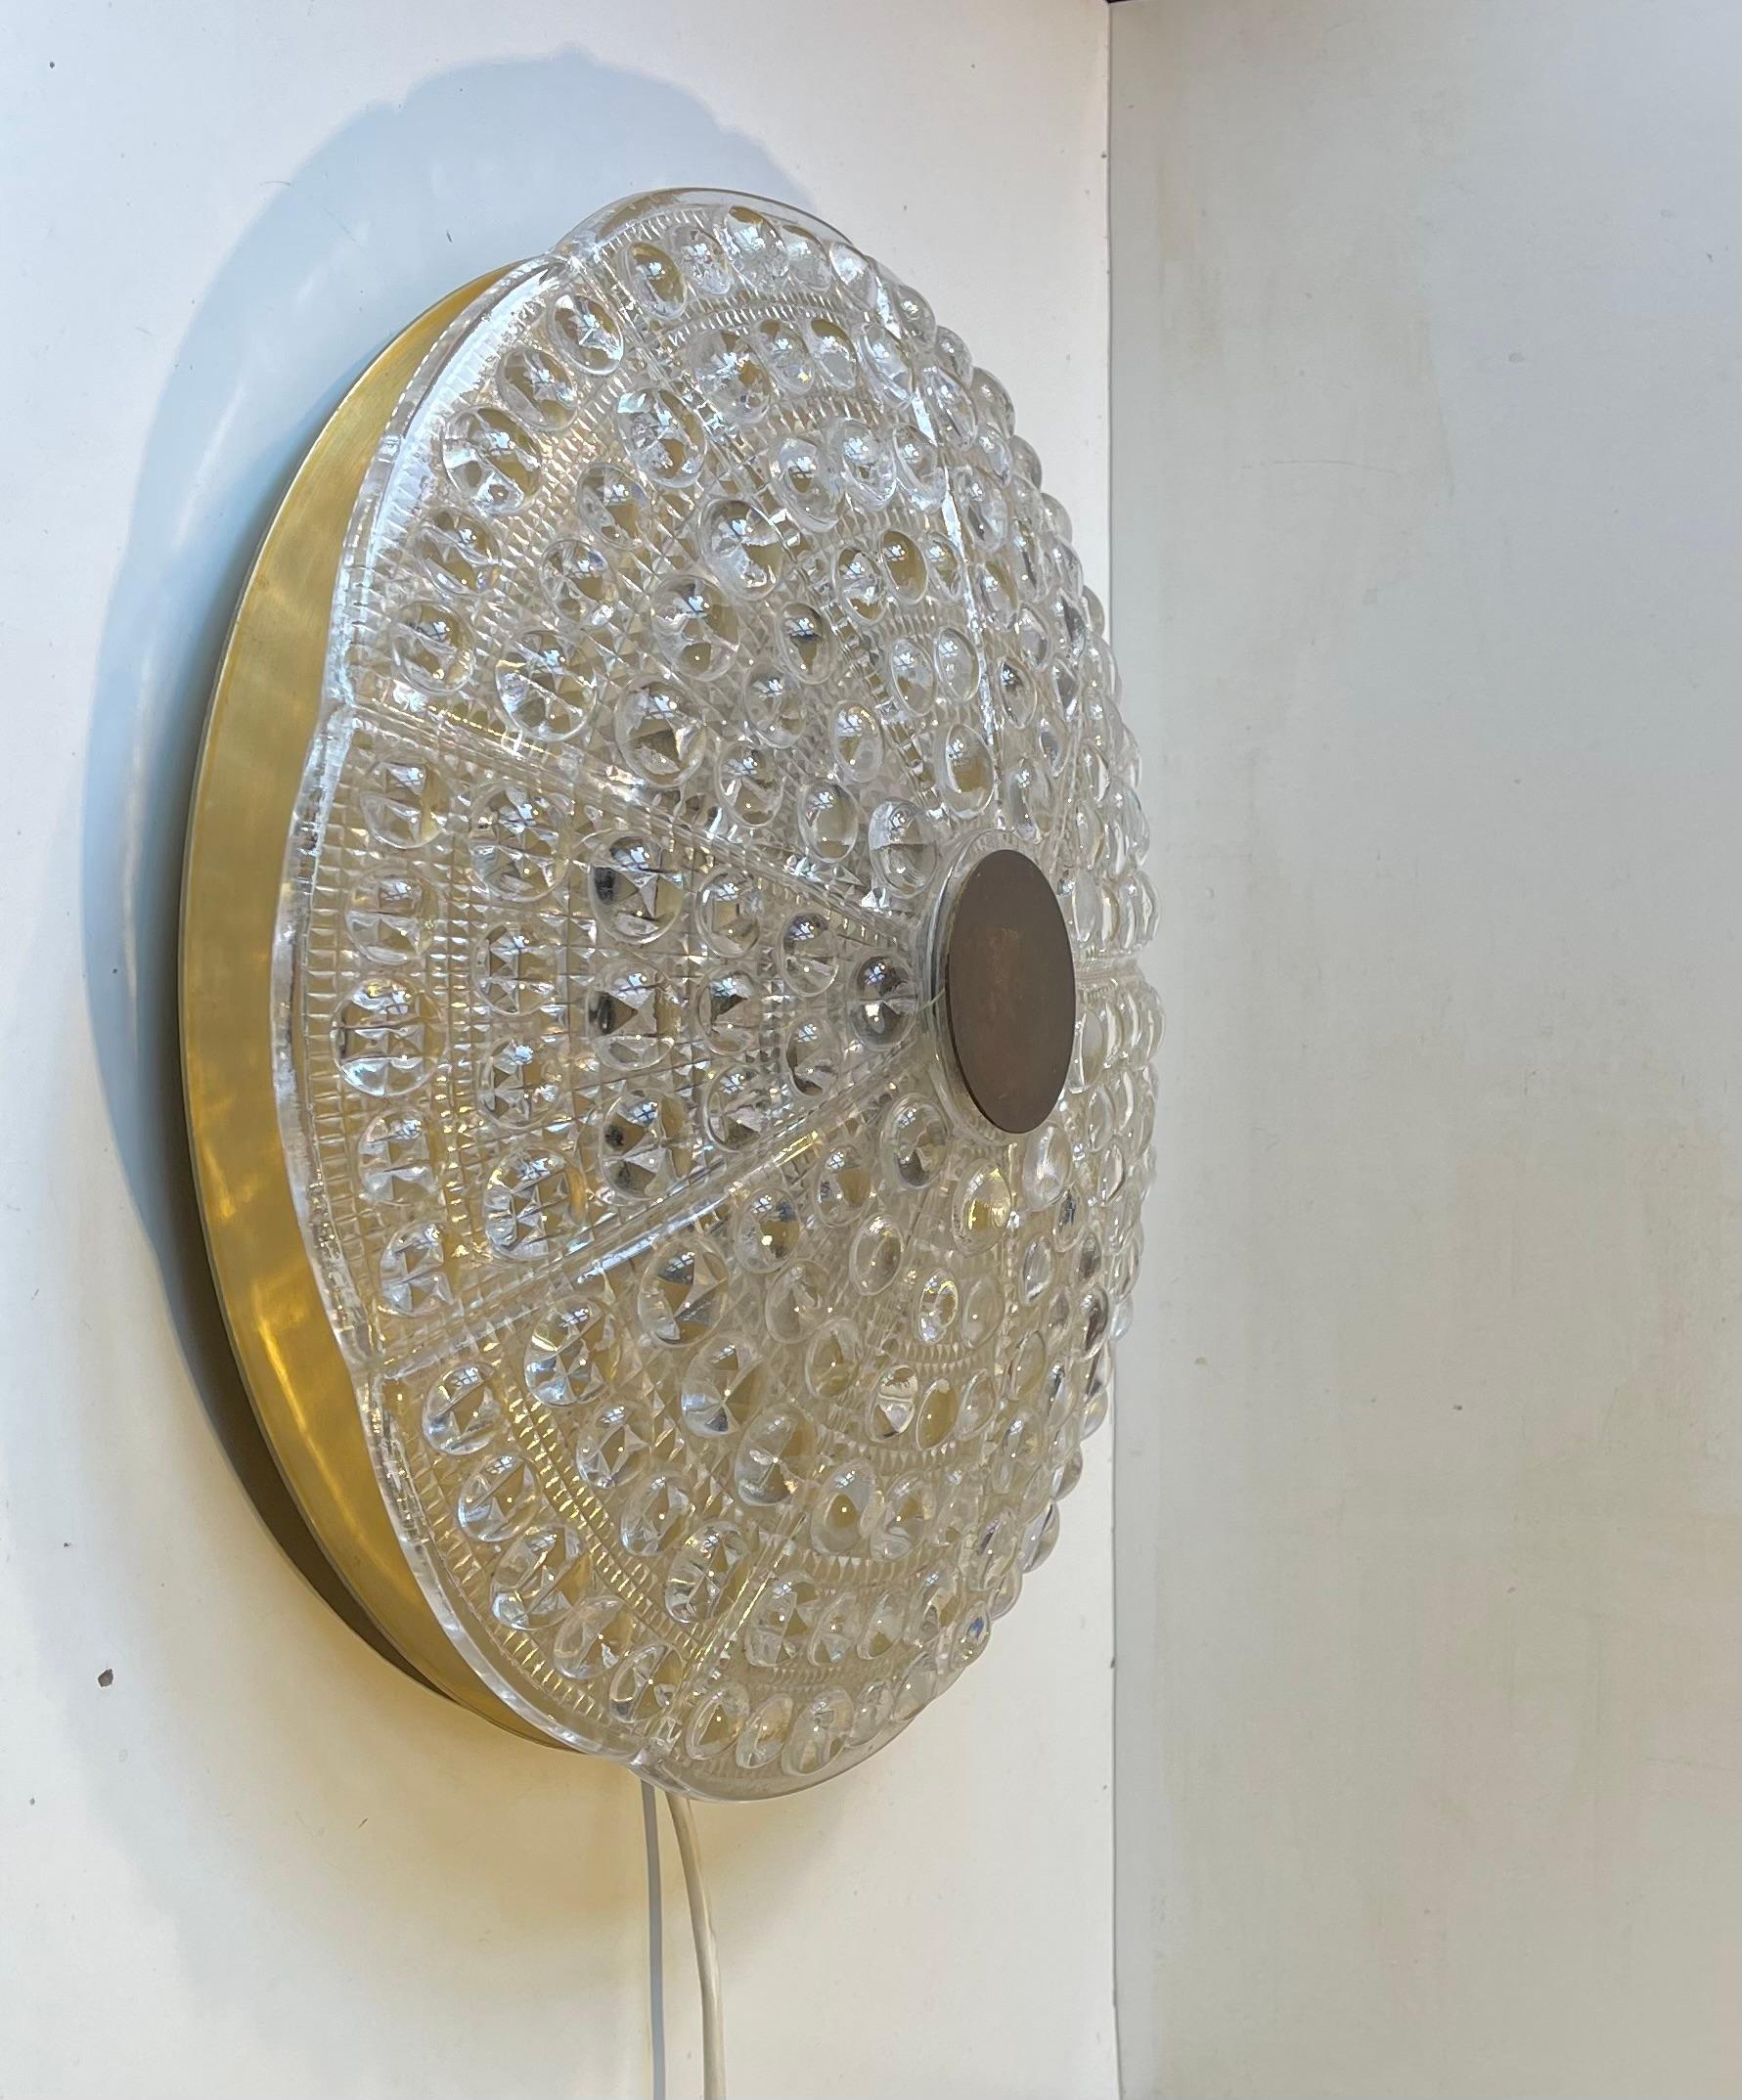 Crystal and brass flush mount or large wall sconce designed by Carl Fagerlund and manufactured by Orrefors in Sweden during the early 1960s. Original configuration with 6 sockets for 6 40 watt bulbs. Measurements: D: 39 cm, H/D: 15 cm. Working